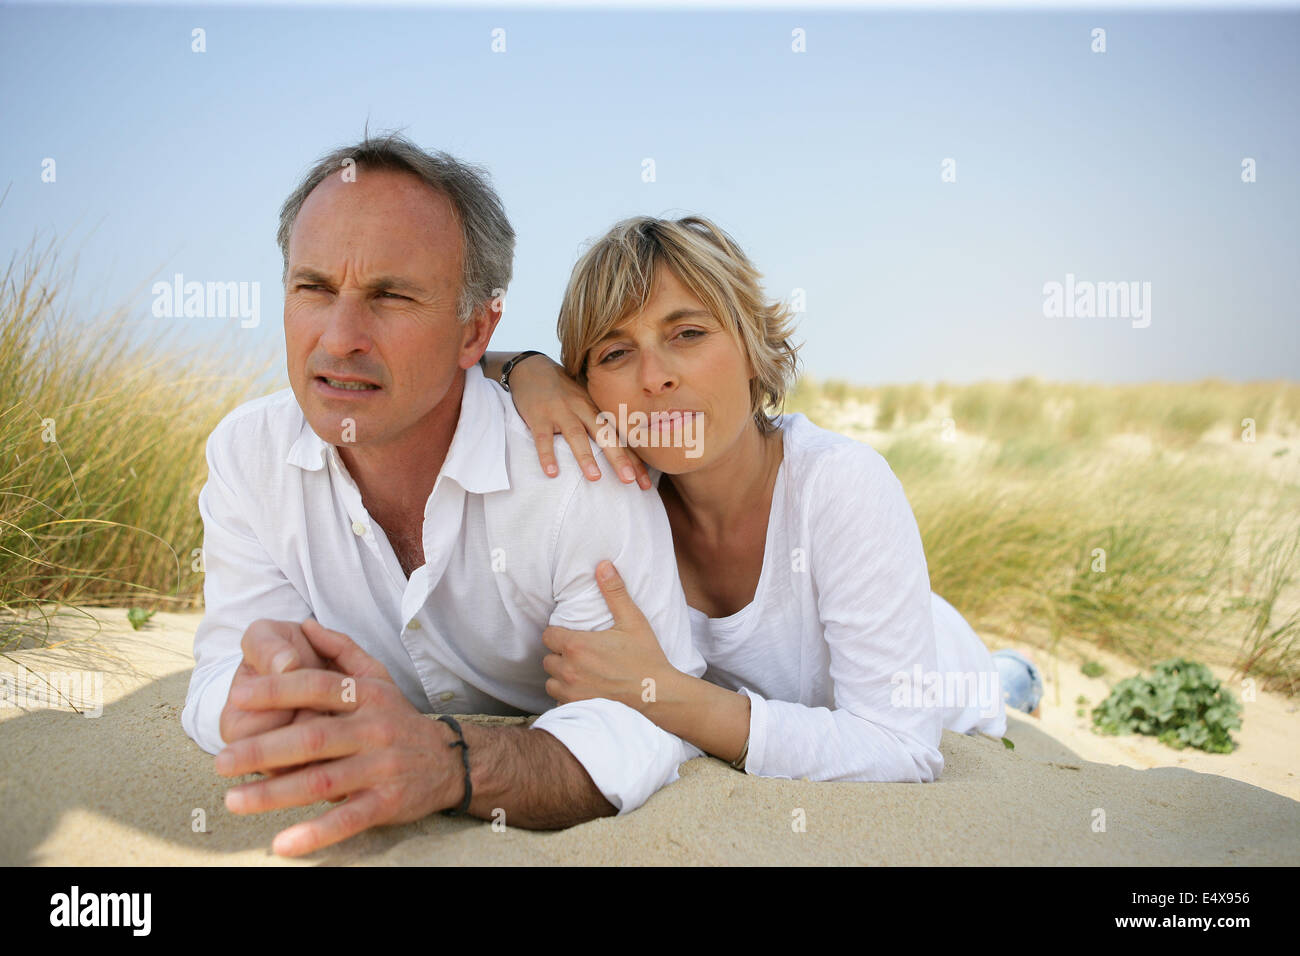 Couple lying in a sand dune Stock Photo